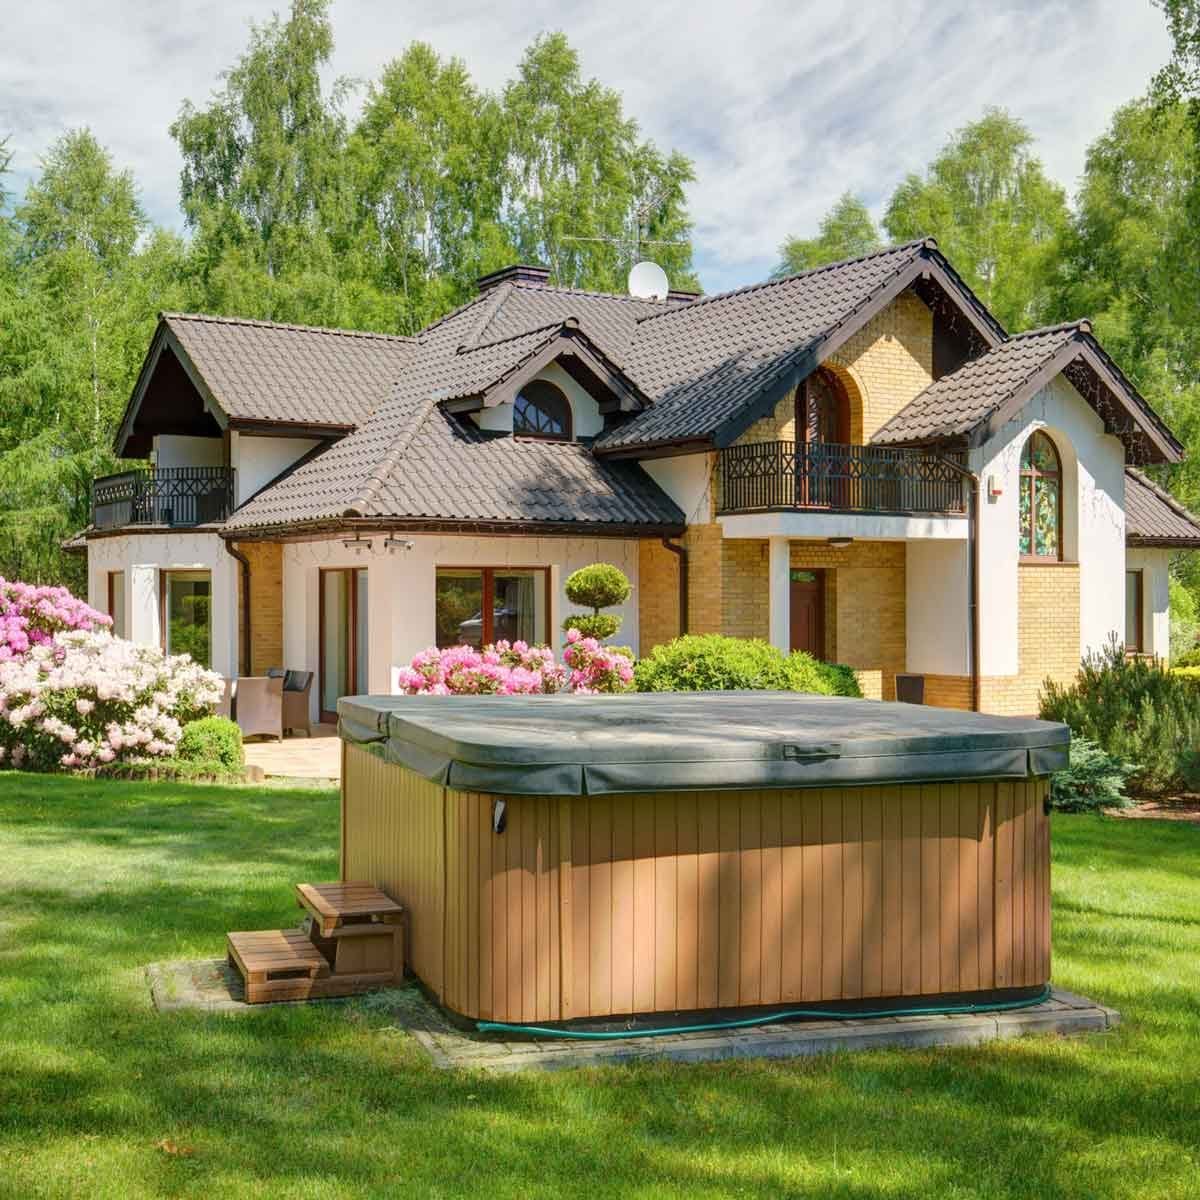 Essential Tips for Planning a Home Spa or Hot Tub